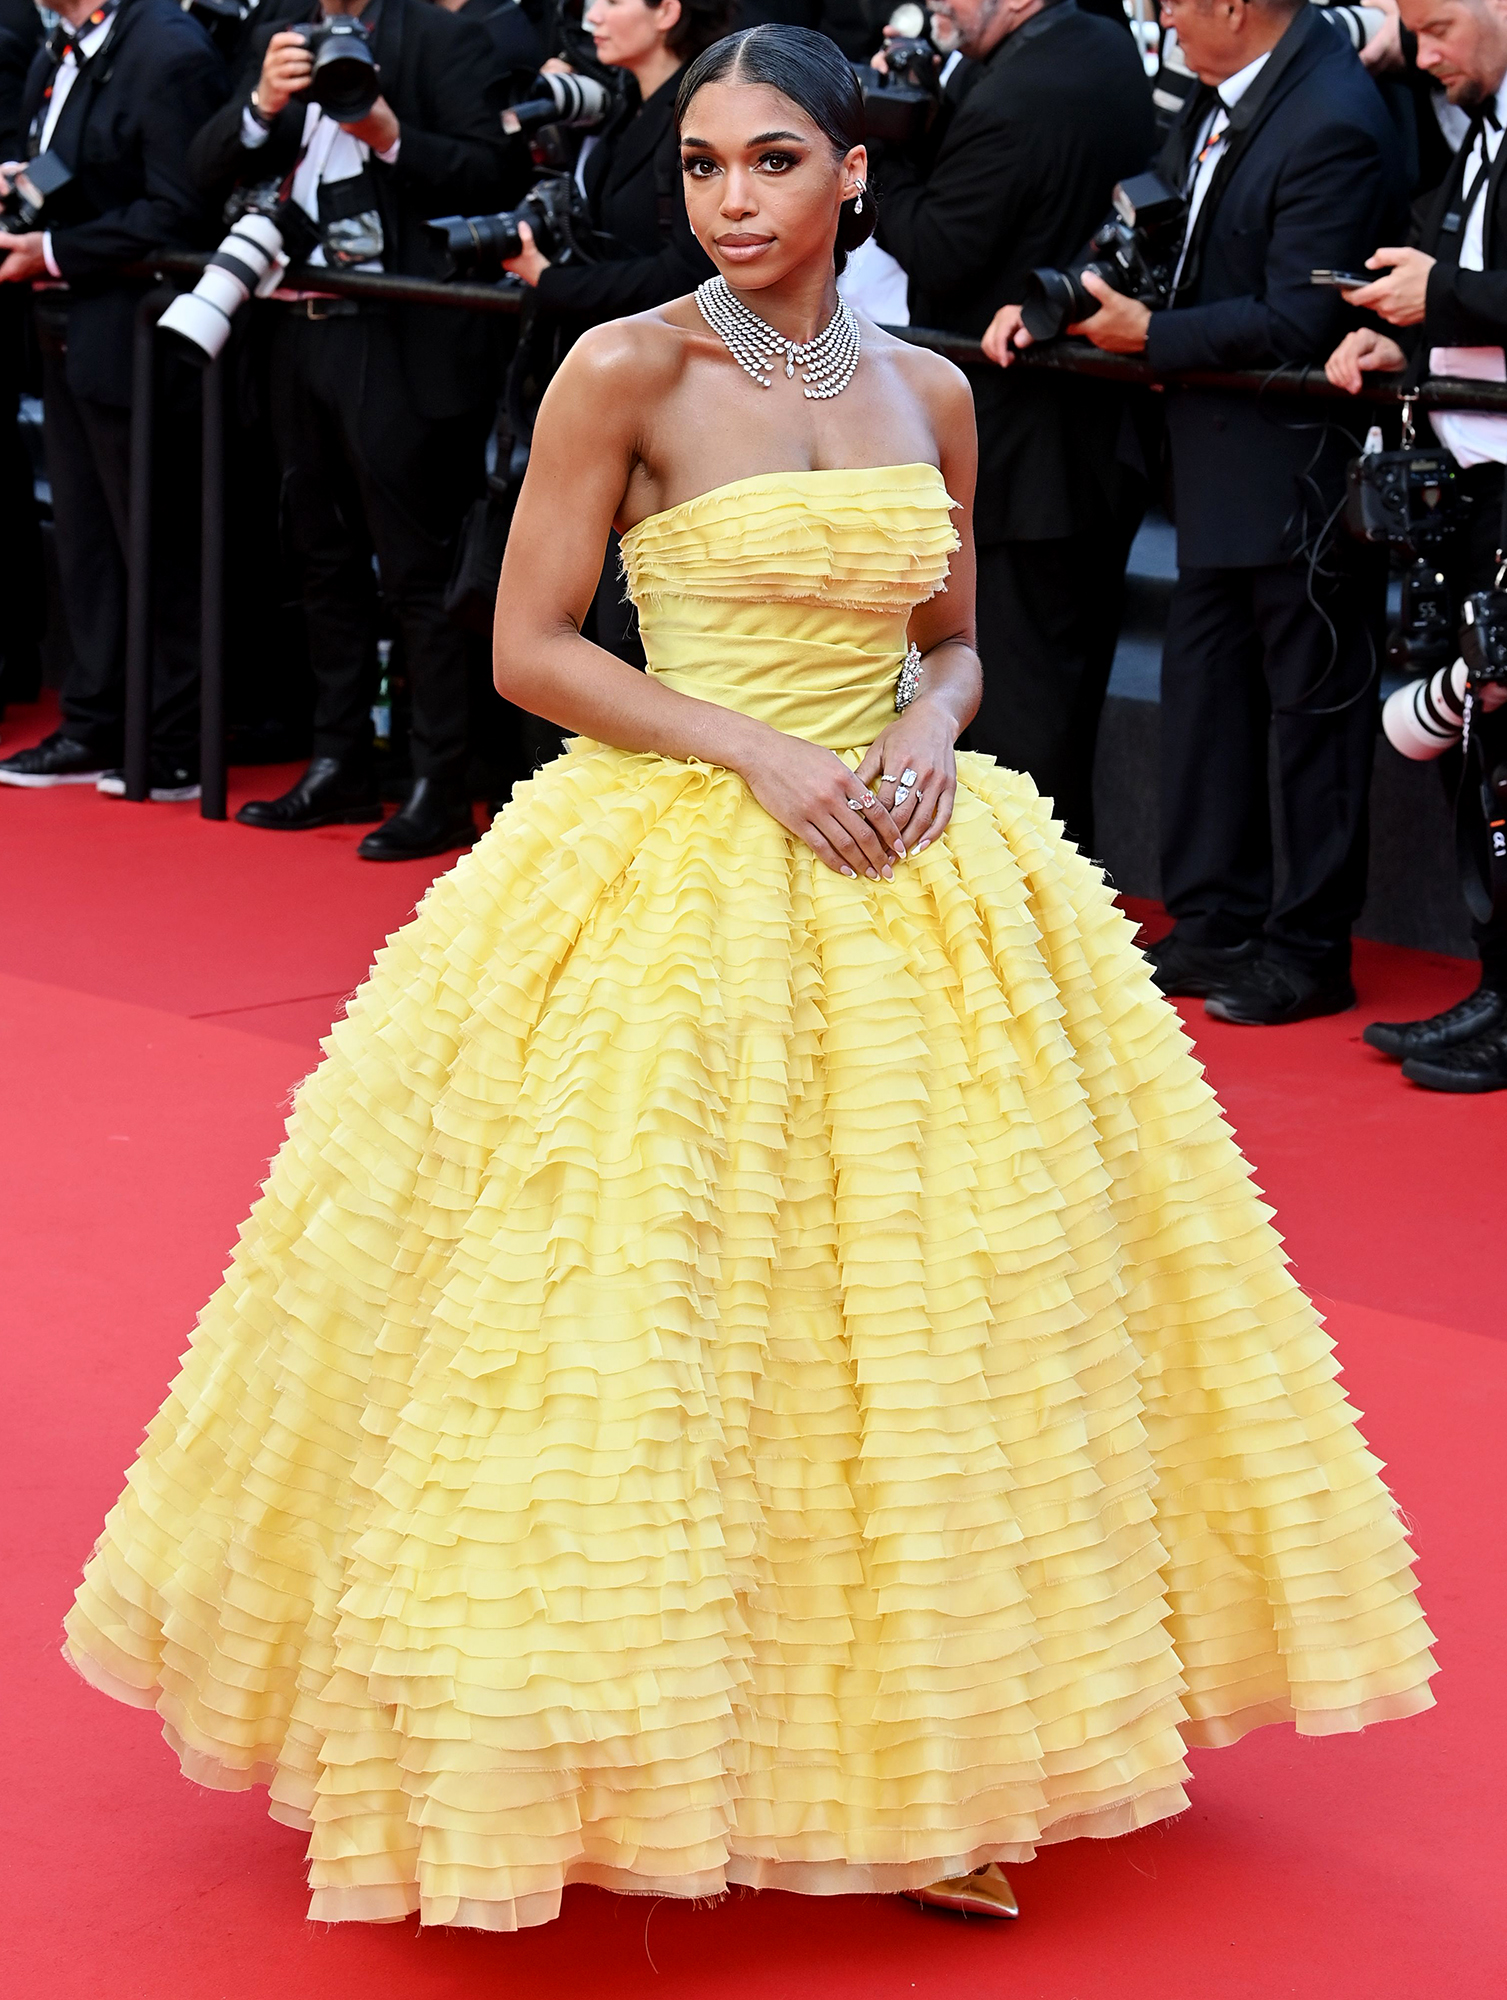 Cannes 2019 Diana Penty looks stunning in her offshoulder gown